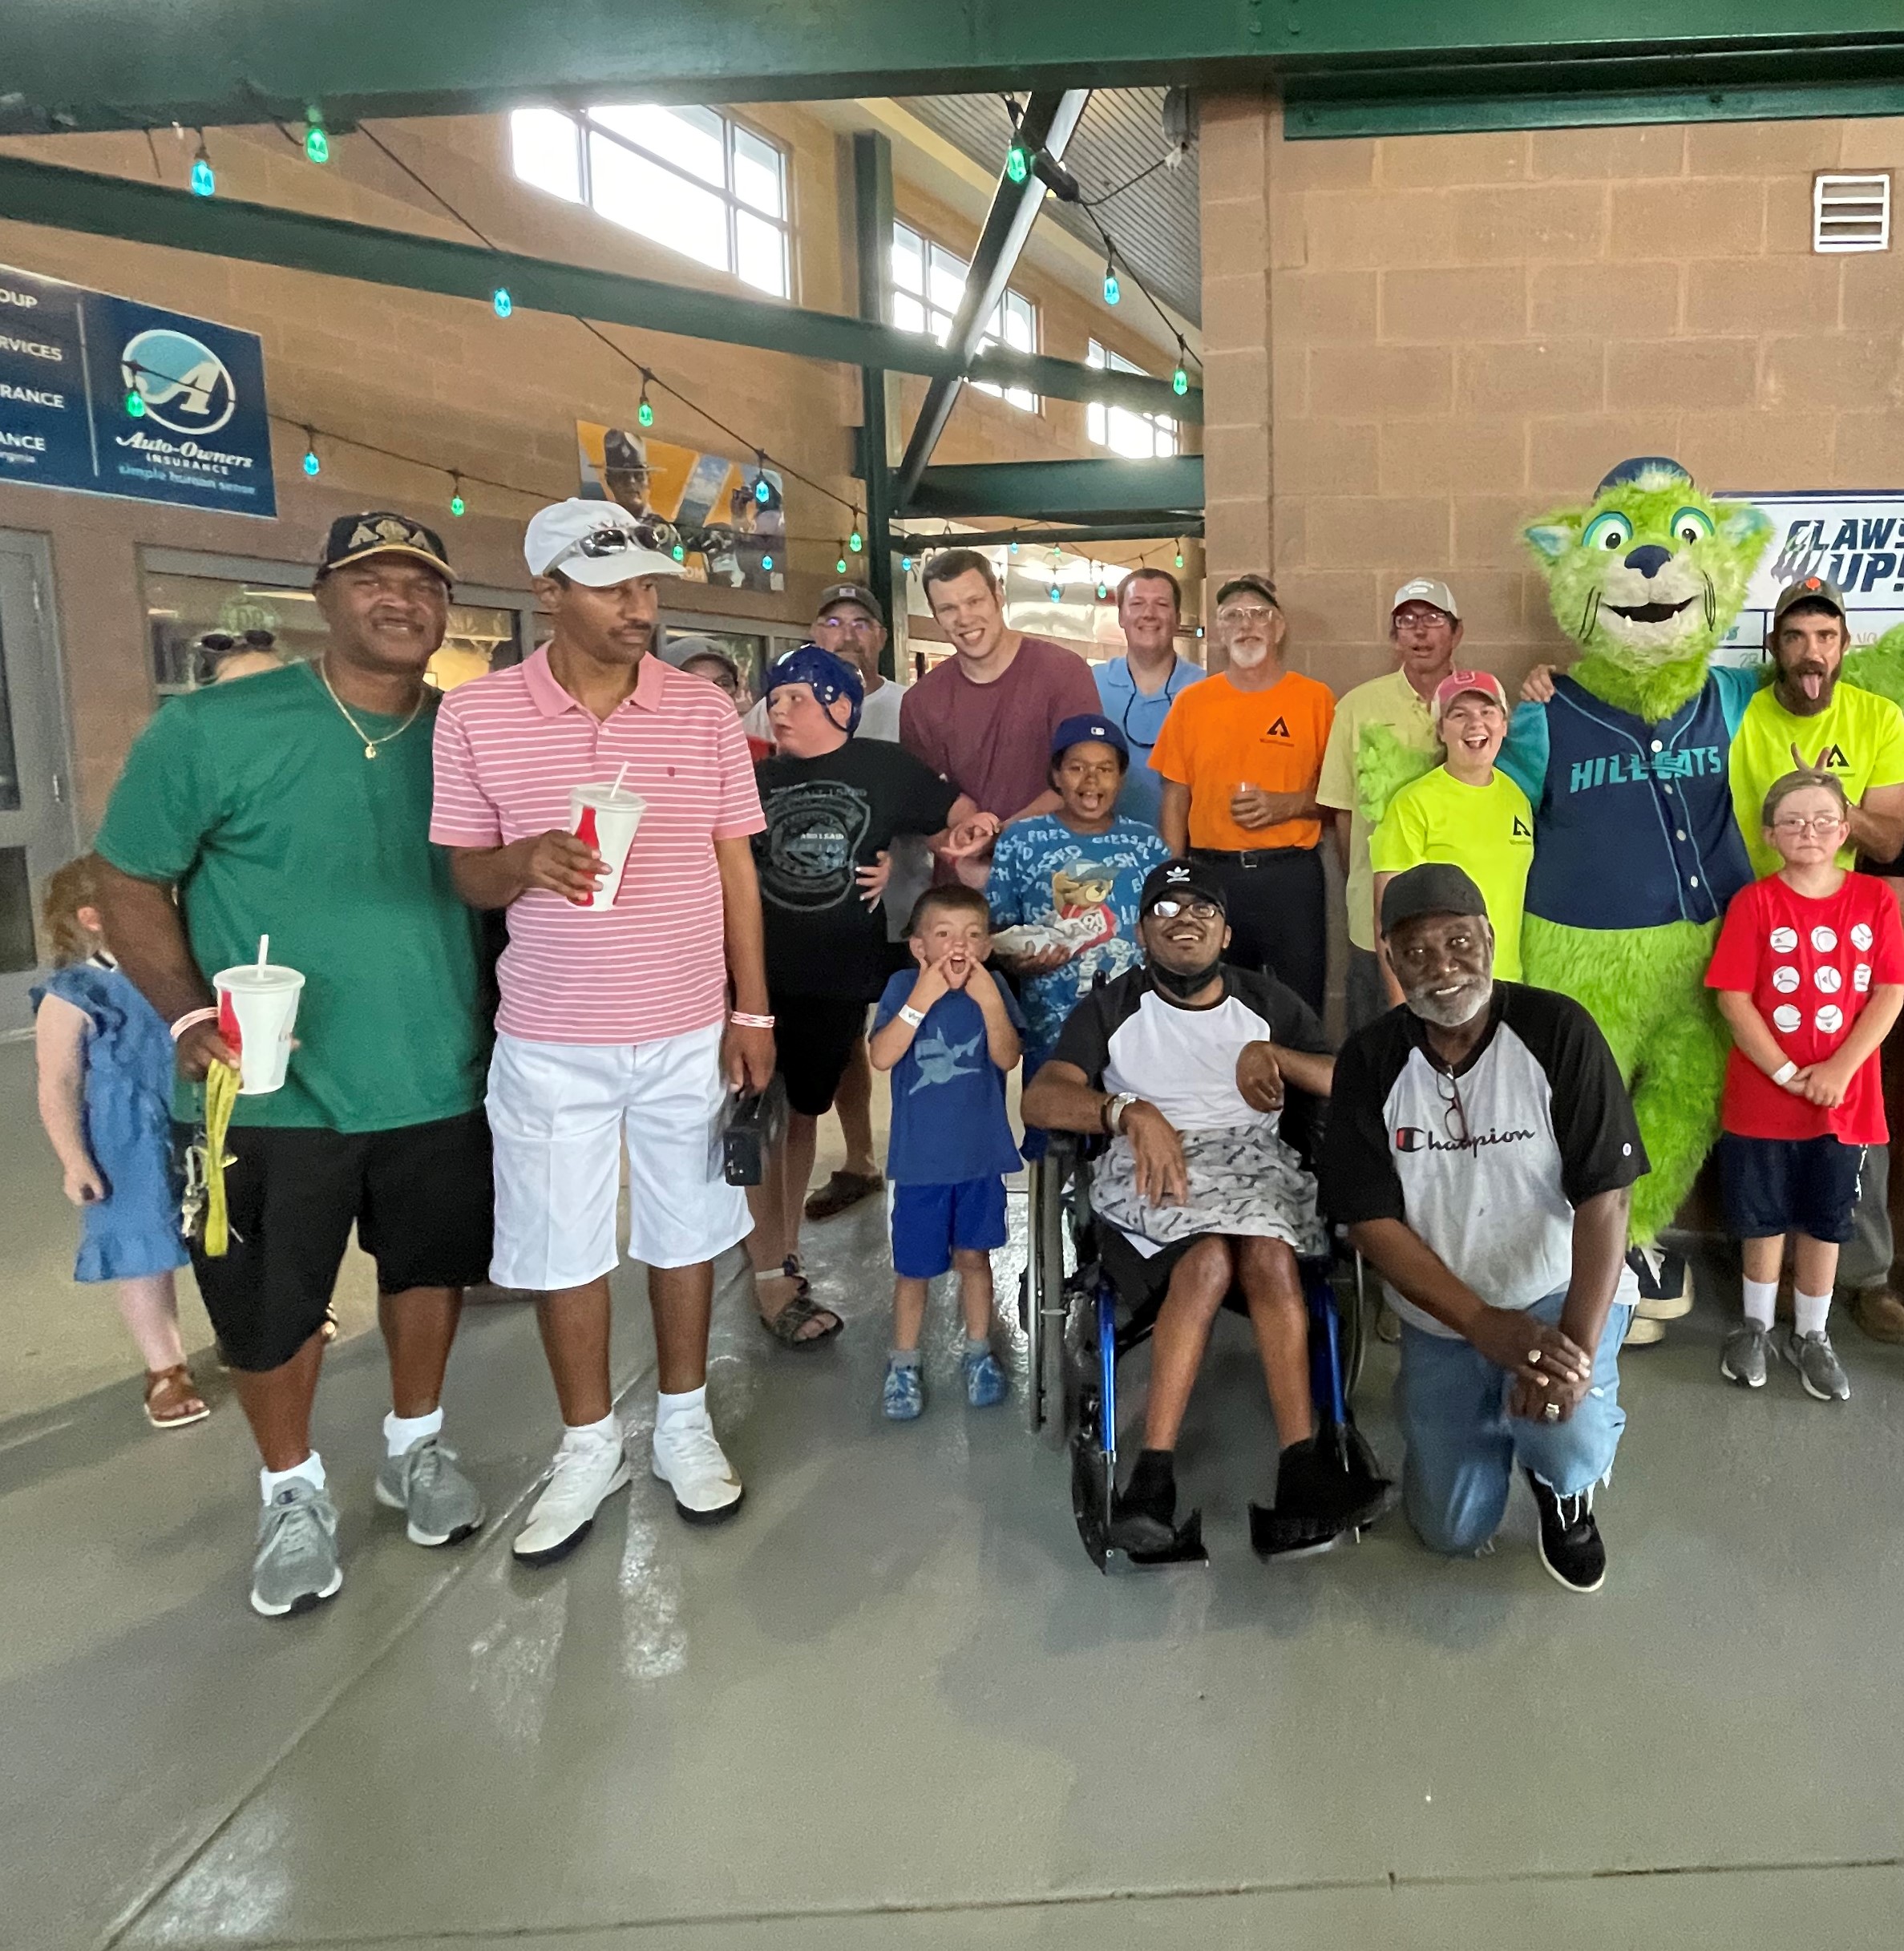 The Va. and N.C. Timberlands Team visiting a Hillcats game.